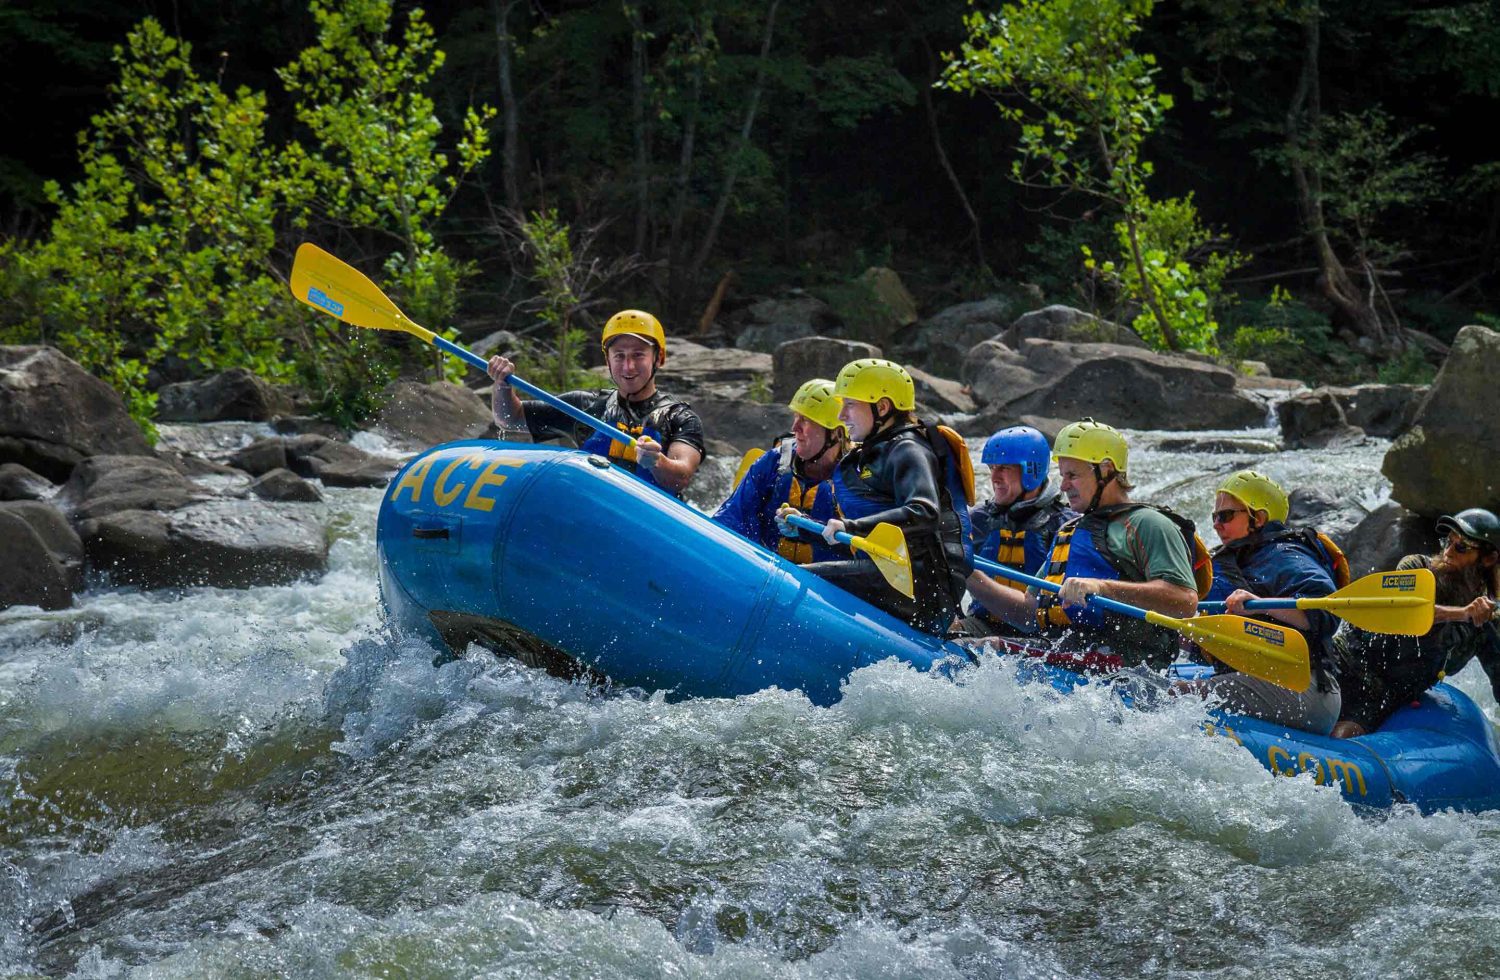 An ACE Adventure Resort raft crests a wave on a Lower Gauley rafting trip in West Virginia.